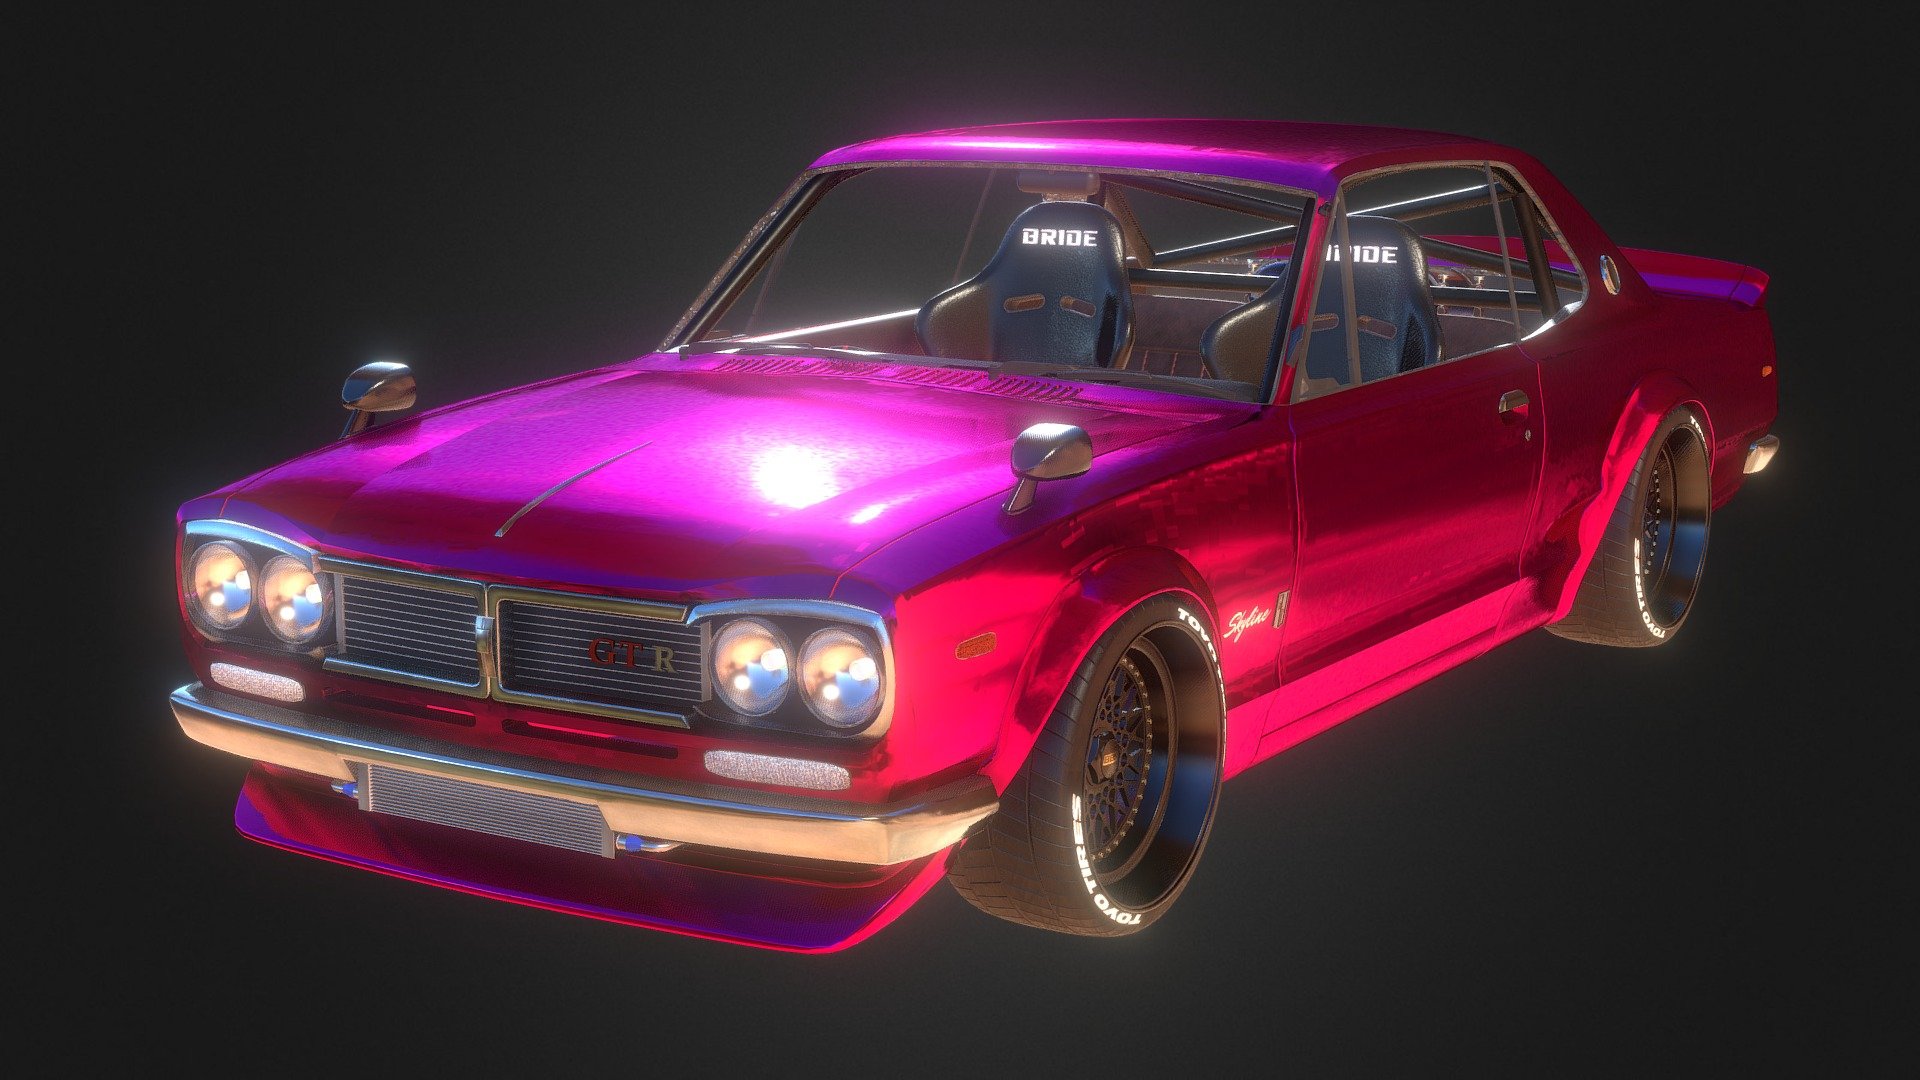 Nissan Skyline Hakosuka slightly modified for street racing
Be the First persone to purchase one of my model! Support is highly appreciated
Watch my Skyline animation: https://www.youtube.com/watch?v=cxf2nWN37H8&amp;t=1s - 1970 Nissan Skyline - High Poly Interior - Download Free 3D model by Marc Ed (@marc.edouard.lepine17) 3d model